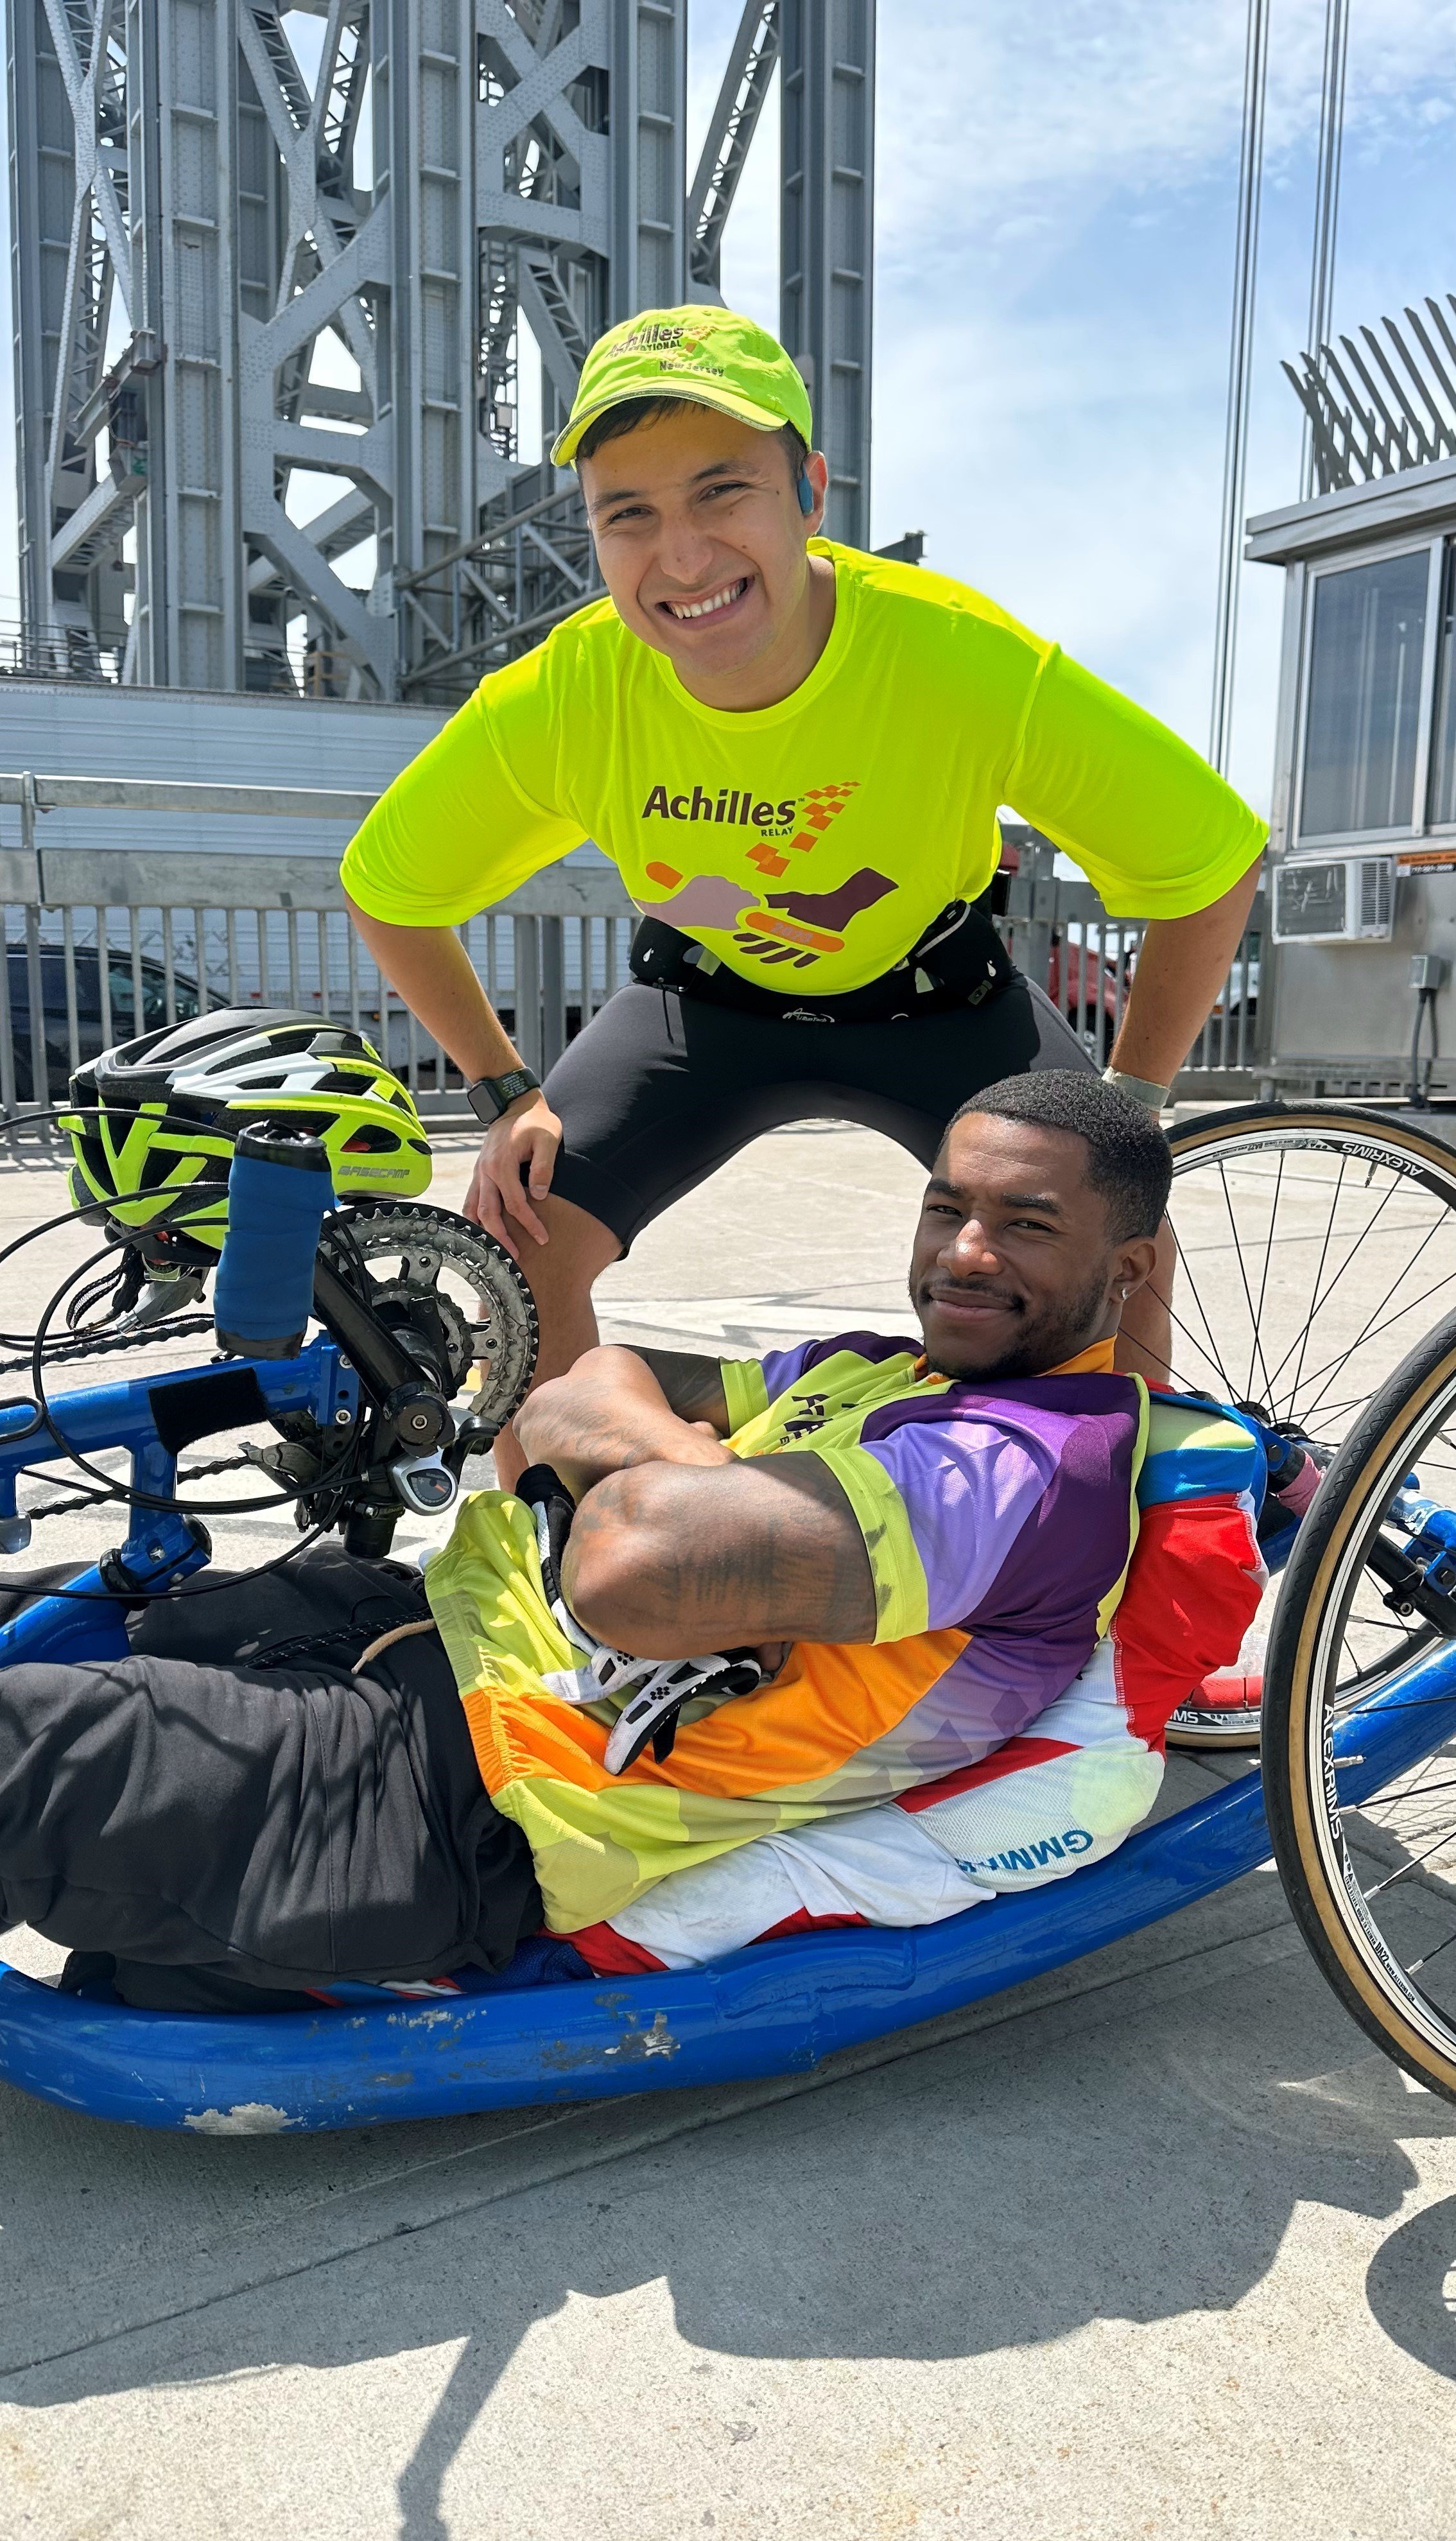  Achilles runner smiling with an athlete riding a handcycle 